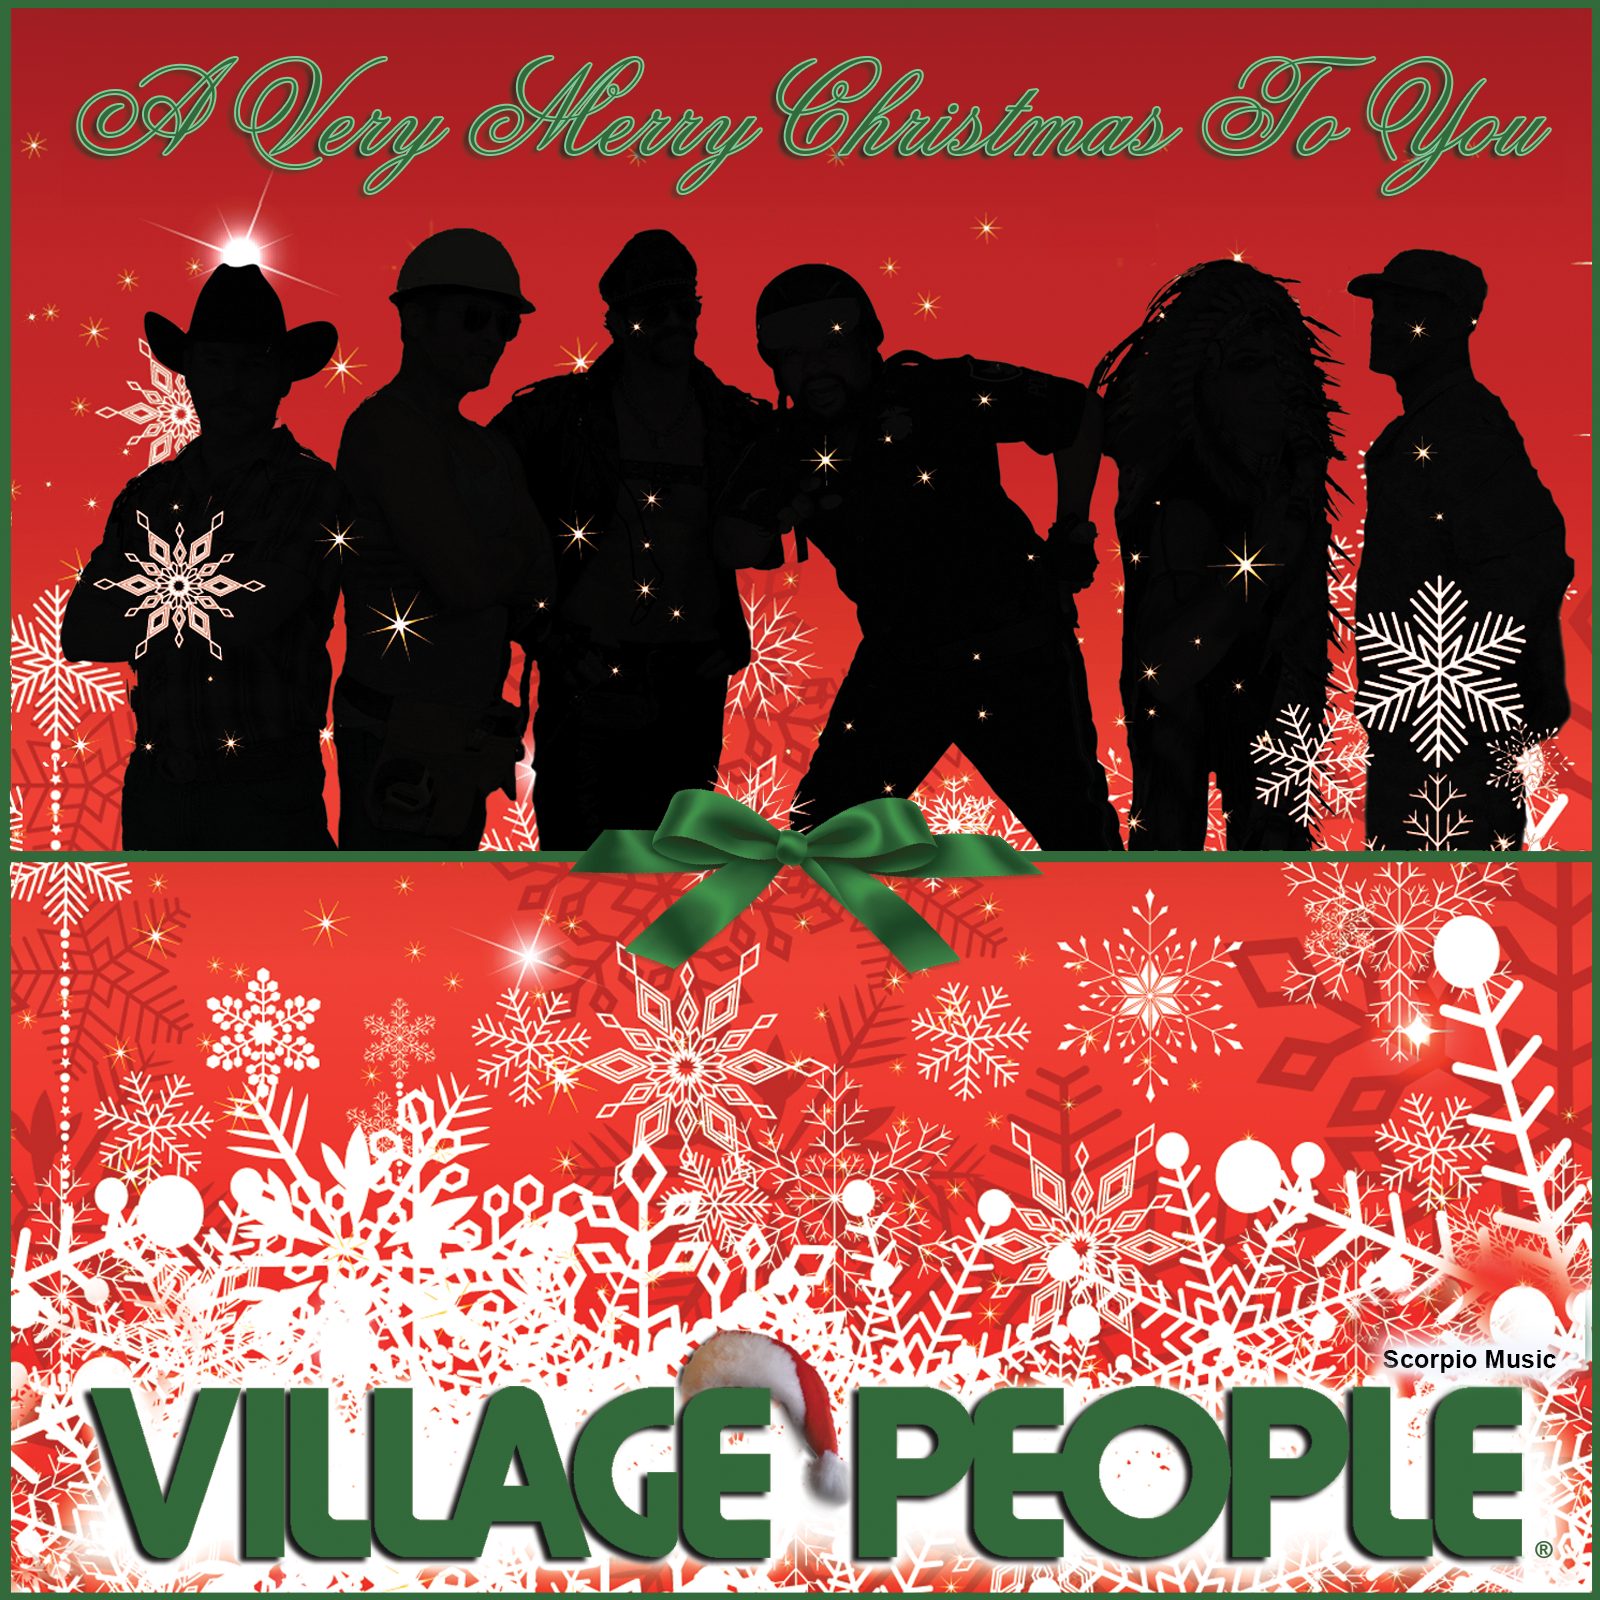 village people a very merry christmas to you